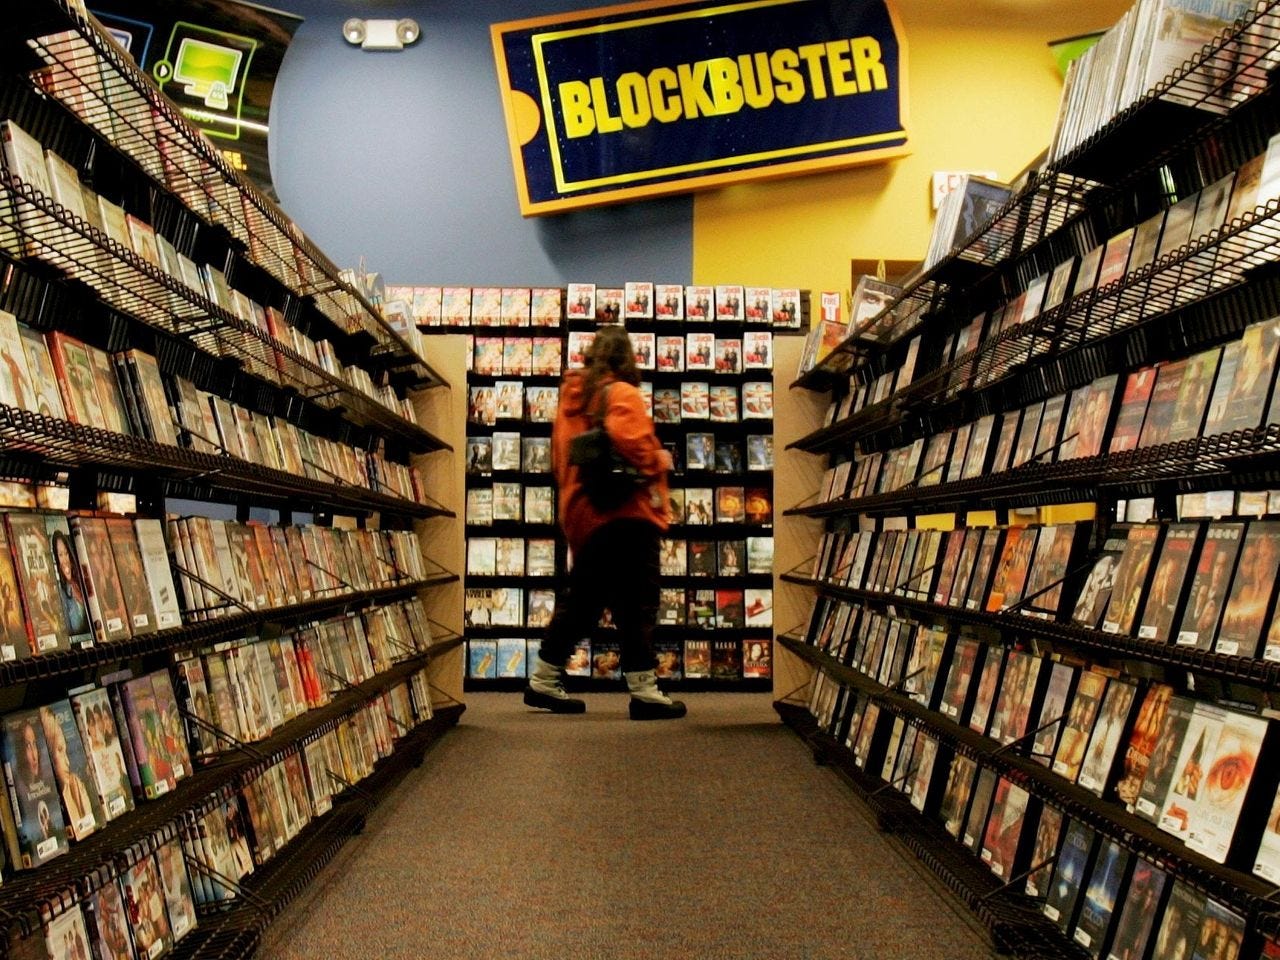 A woman browses video rentals in a Blockbuster, a business that was popular but collapsed due to not adapting to digital trends